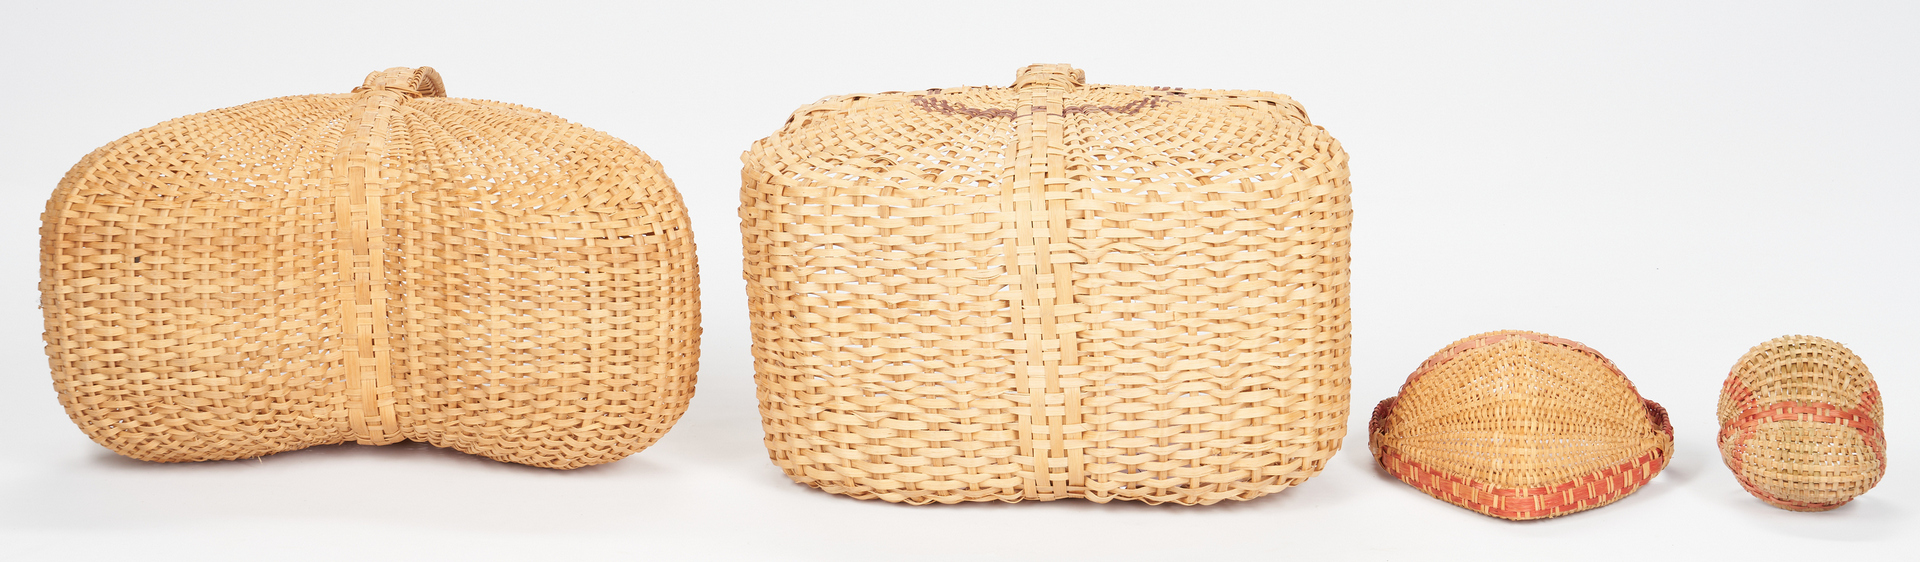 Lot 862: 4 Contemporary Southern Baskets, incl. Youngblood